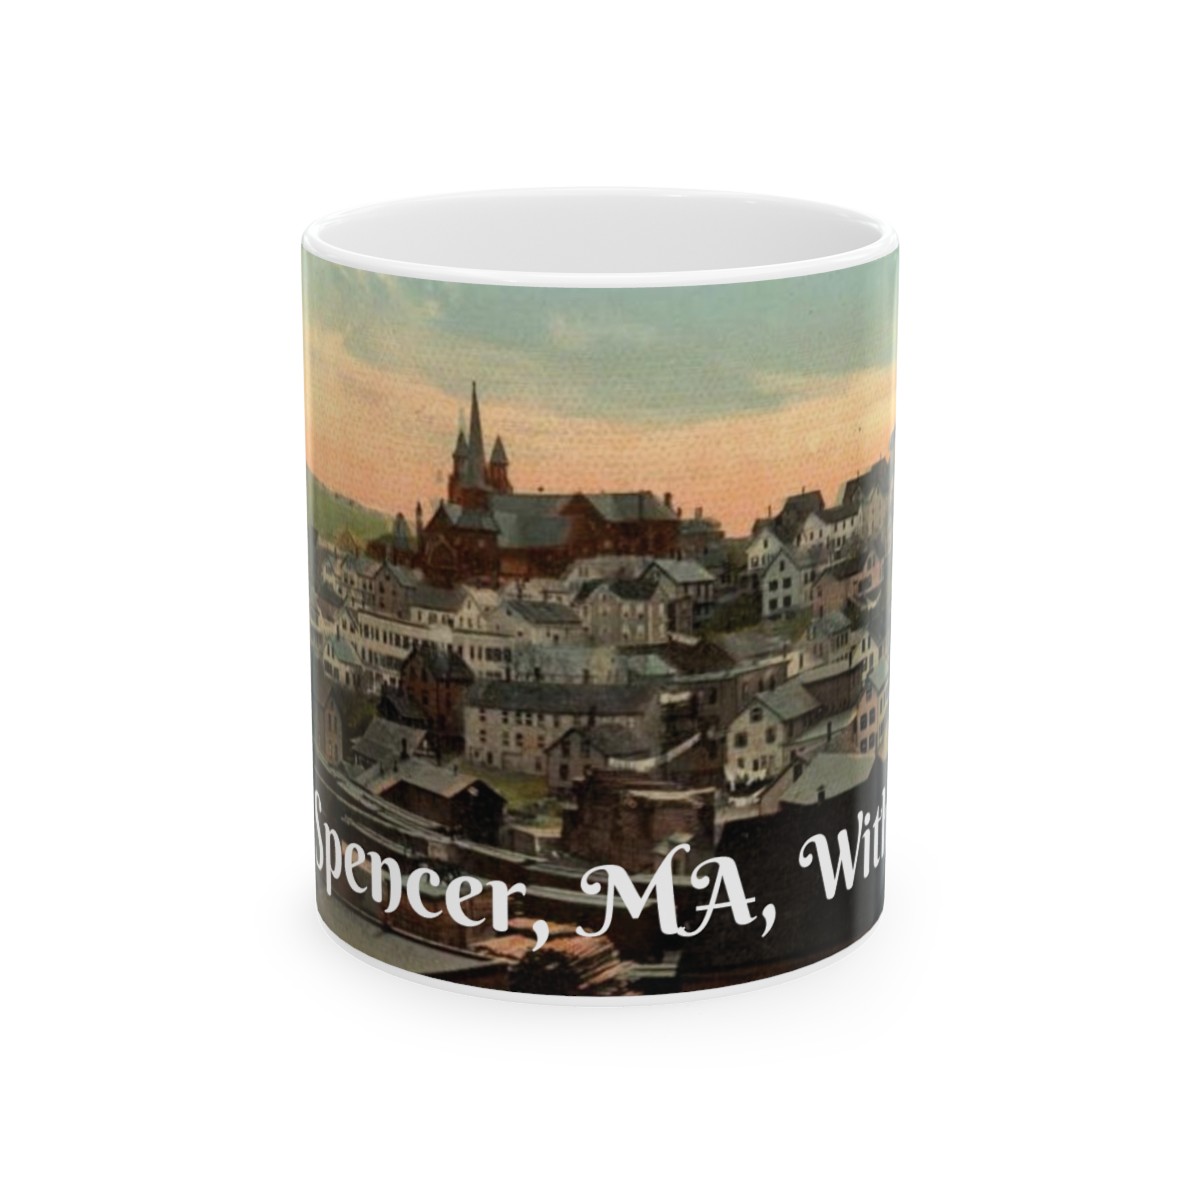 From Spencer, MA, With Love  - Vintage Postcard - Ceramic Mug 11oz product thumbnail image